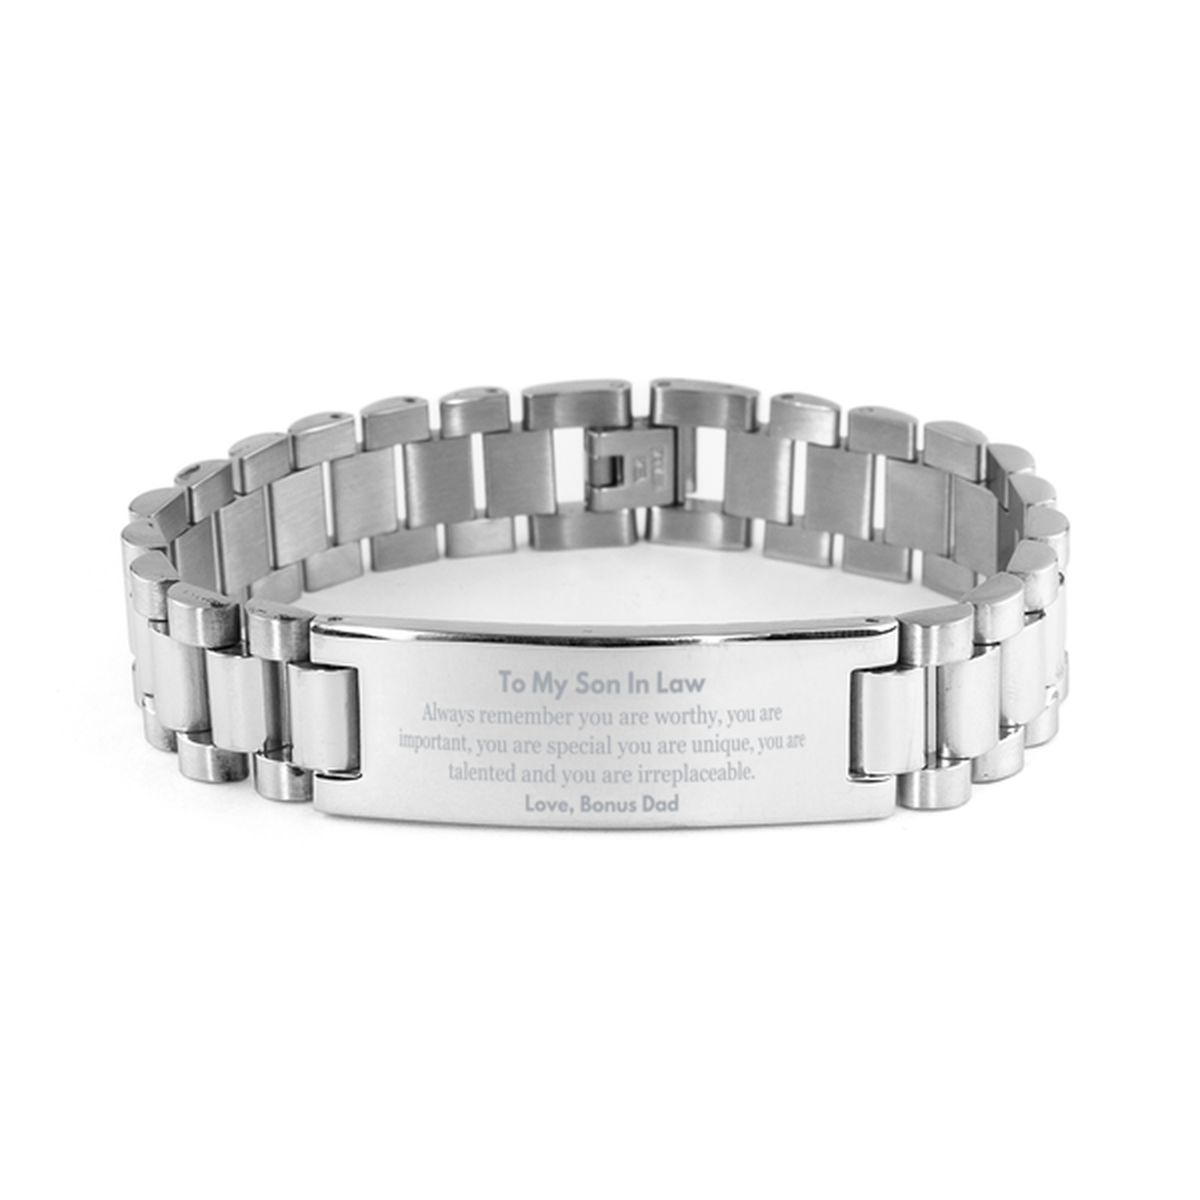 Son In Law Birthday Gifts from Bonus Dad, Inspirational Ladder Stainless Steel Bracelet for Son In Law Christmas Graduation Gifts for Son In Law Always remember you are worthy, you are important. Love, Bonus Dad